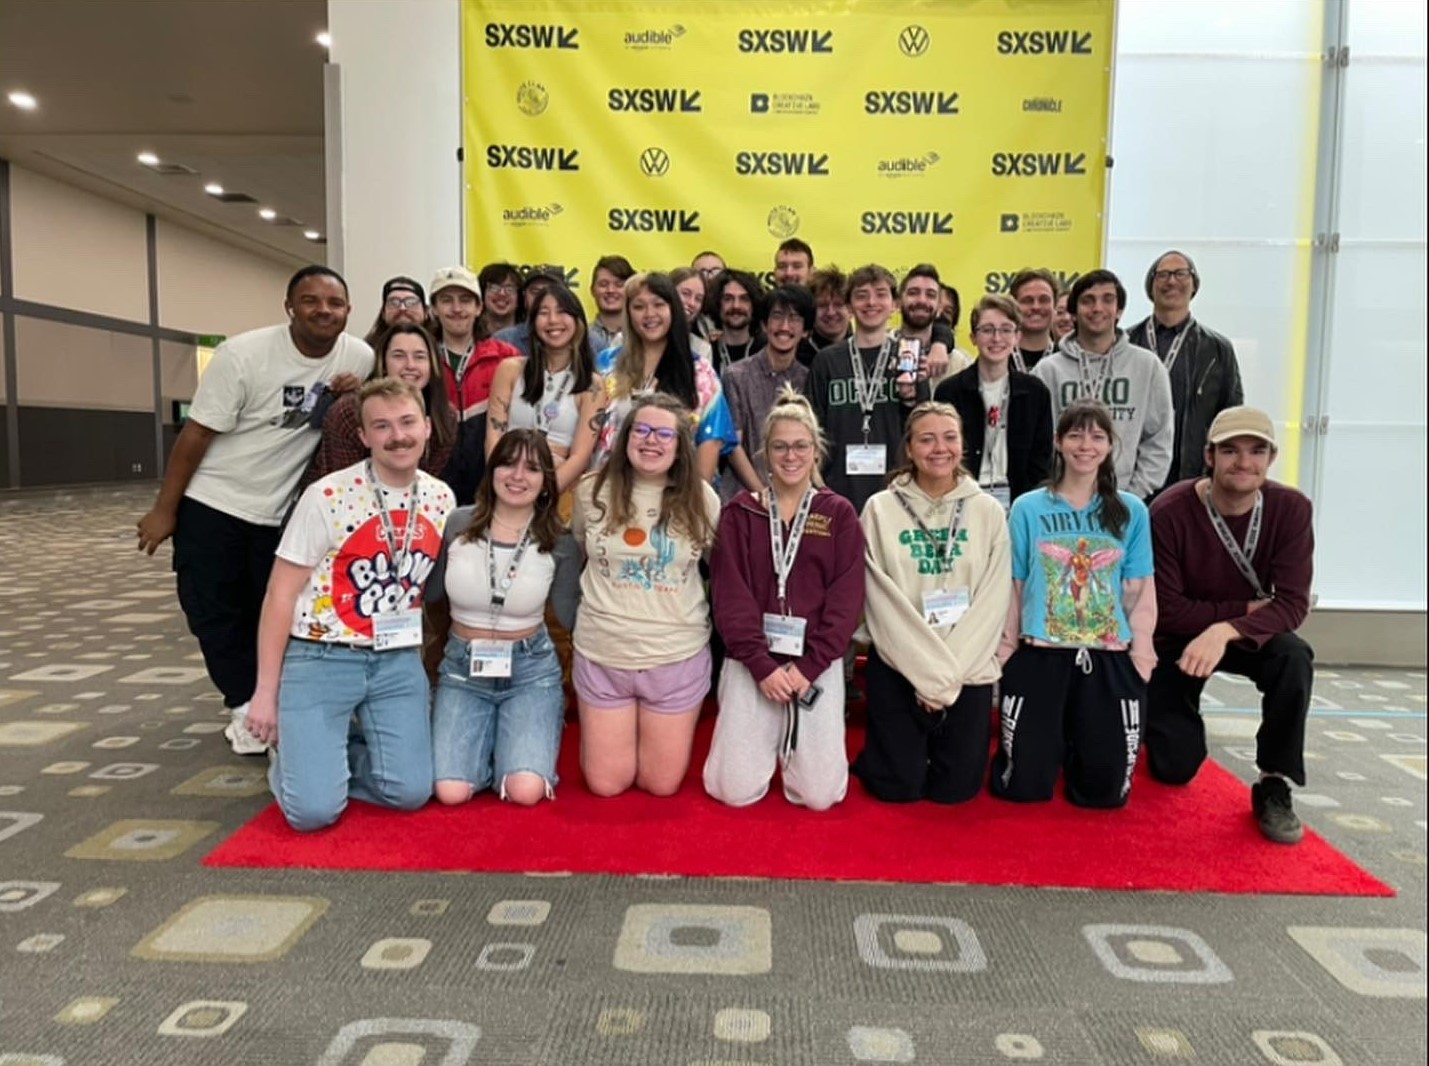 OHIO students gain unparalleled experiences and networking opportunities during SXSW